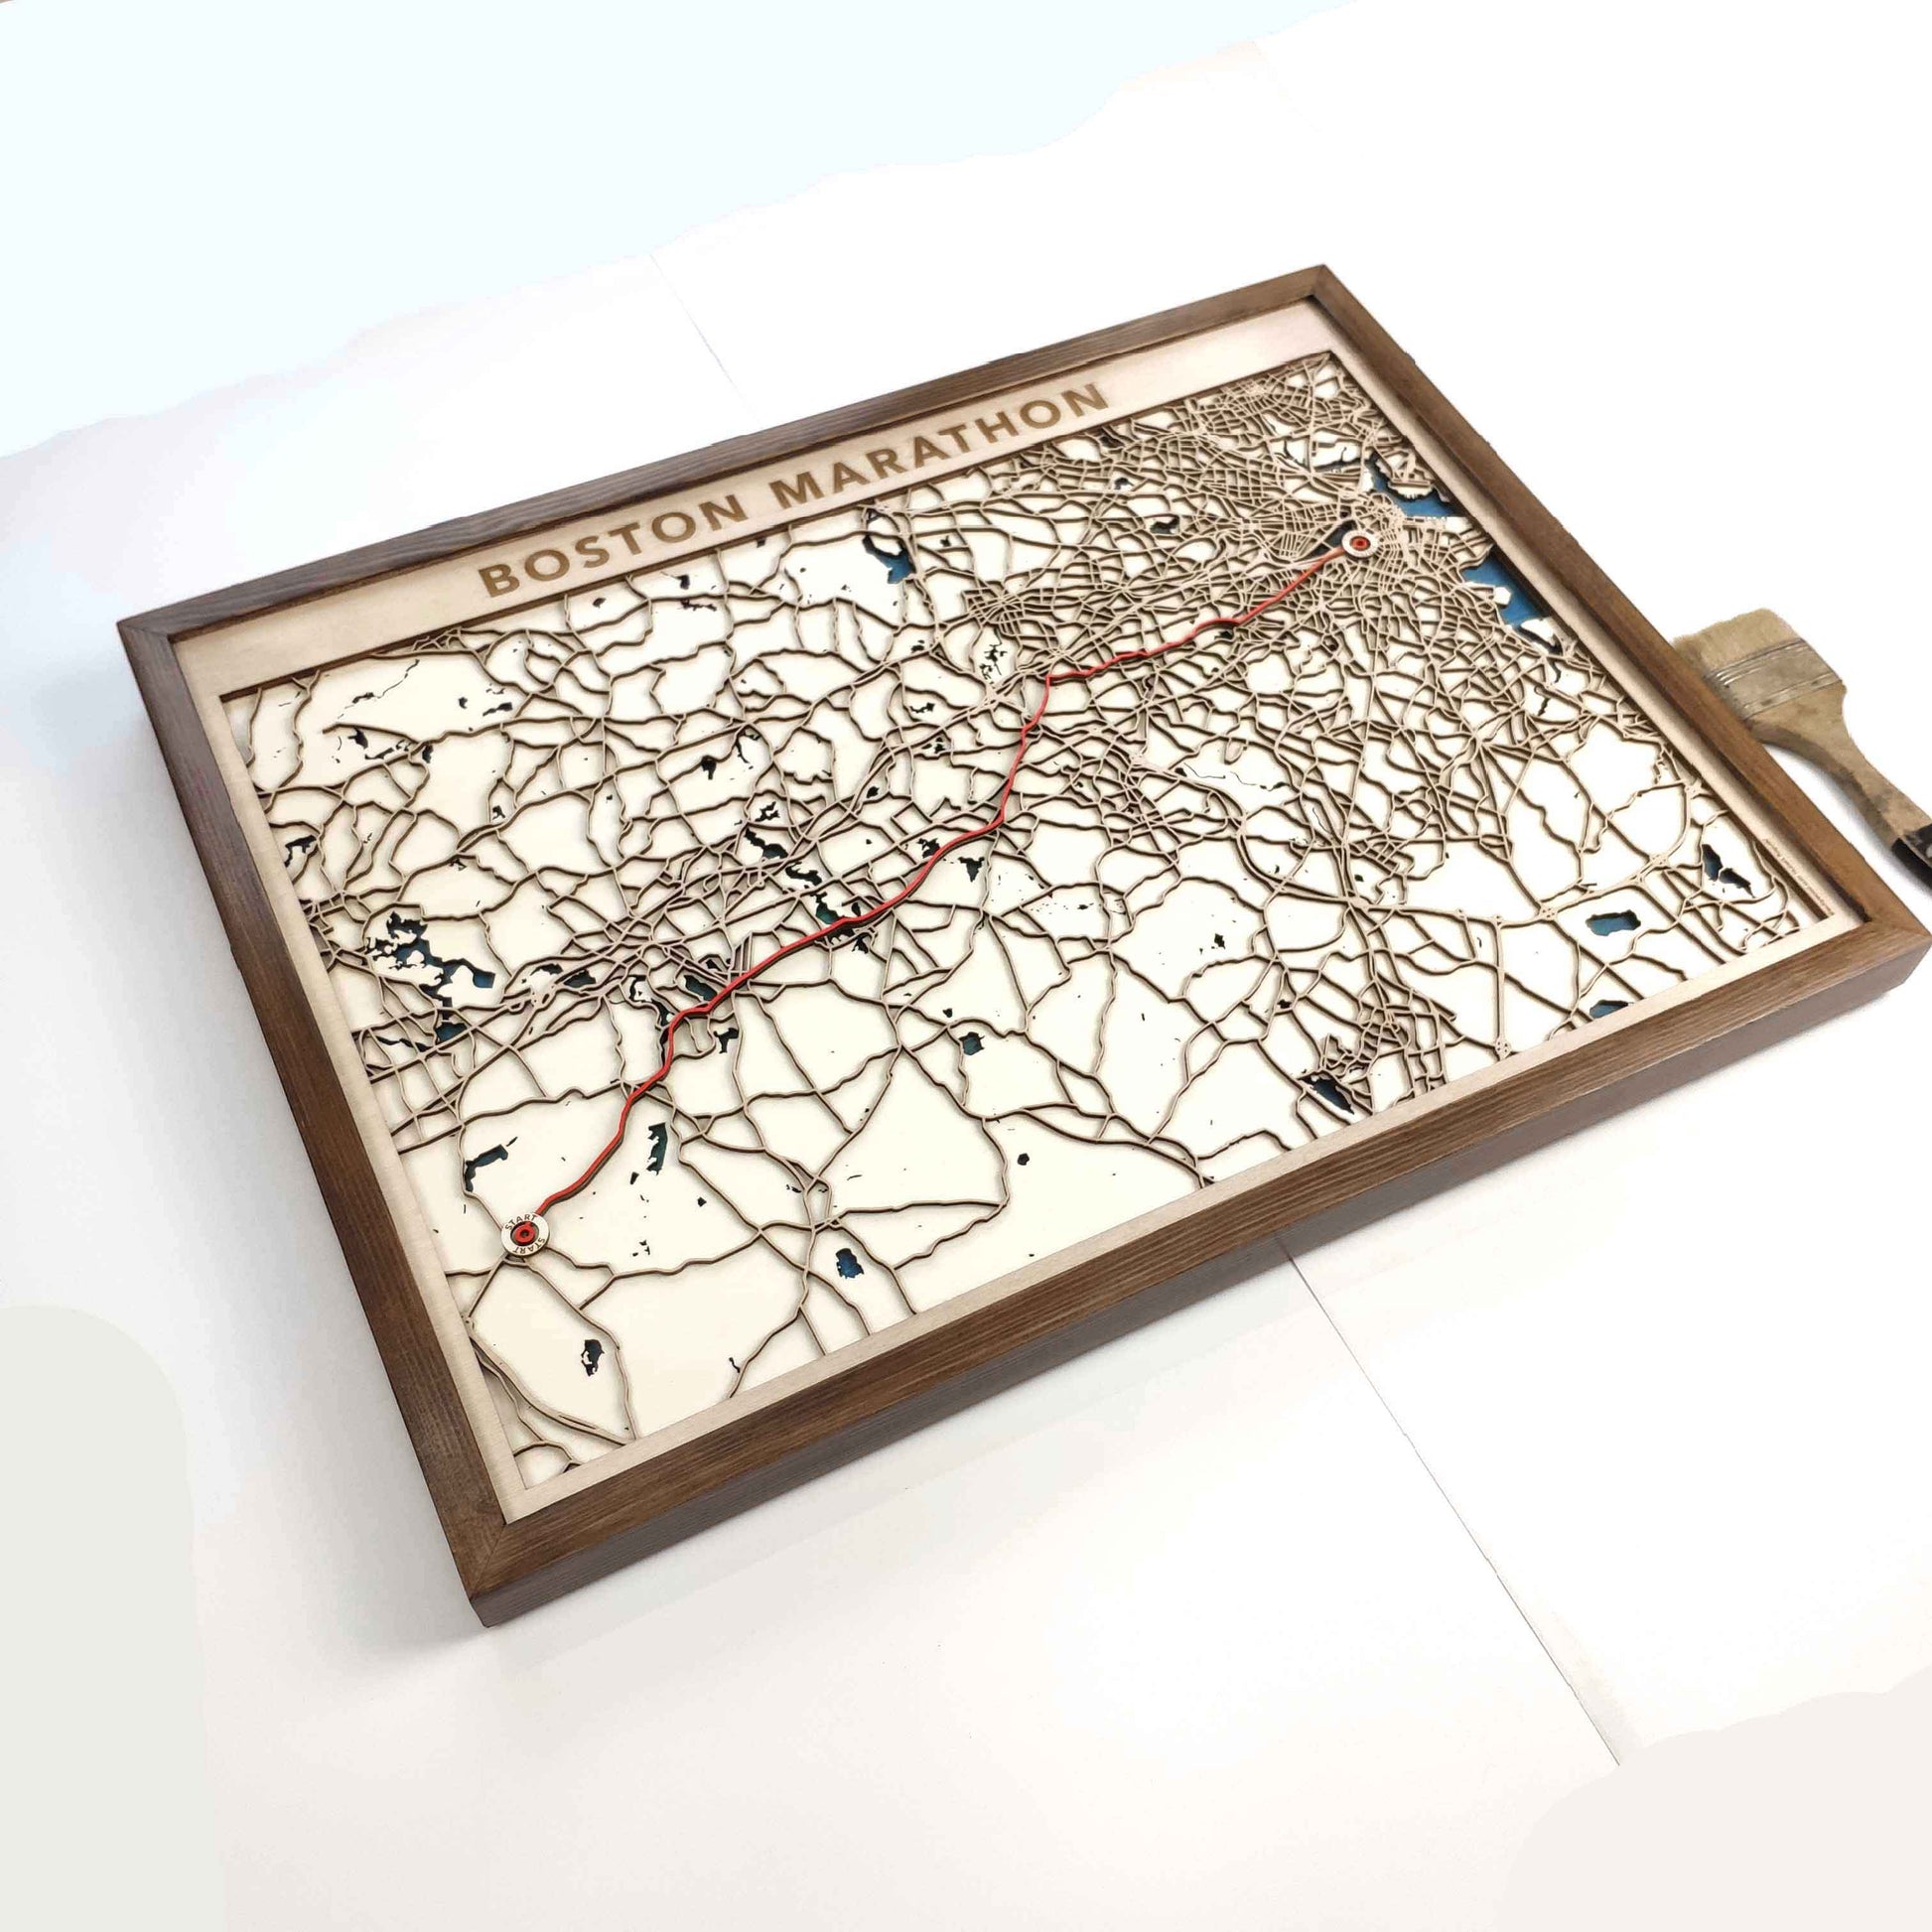 Boston Marathon Laser-Cut Wooden Map – Unique Runner Poster Gift by CityWood - Custom Wood Map Art - Unique Laser Cut Engraved - Anniversary Gift